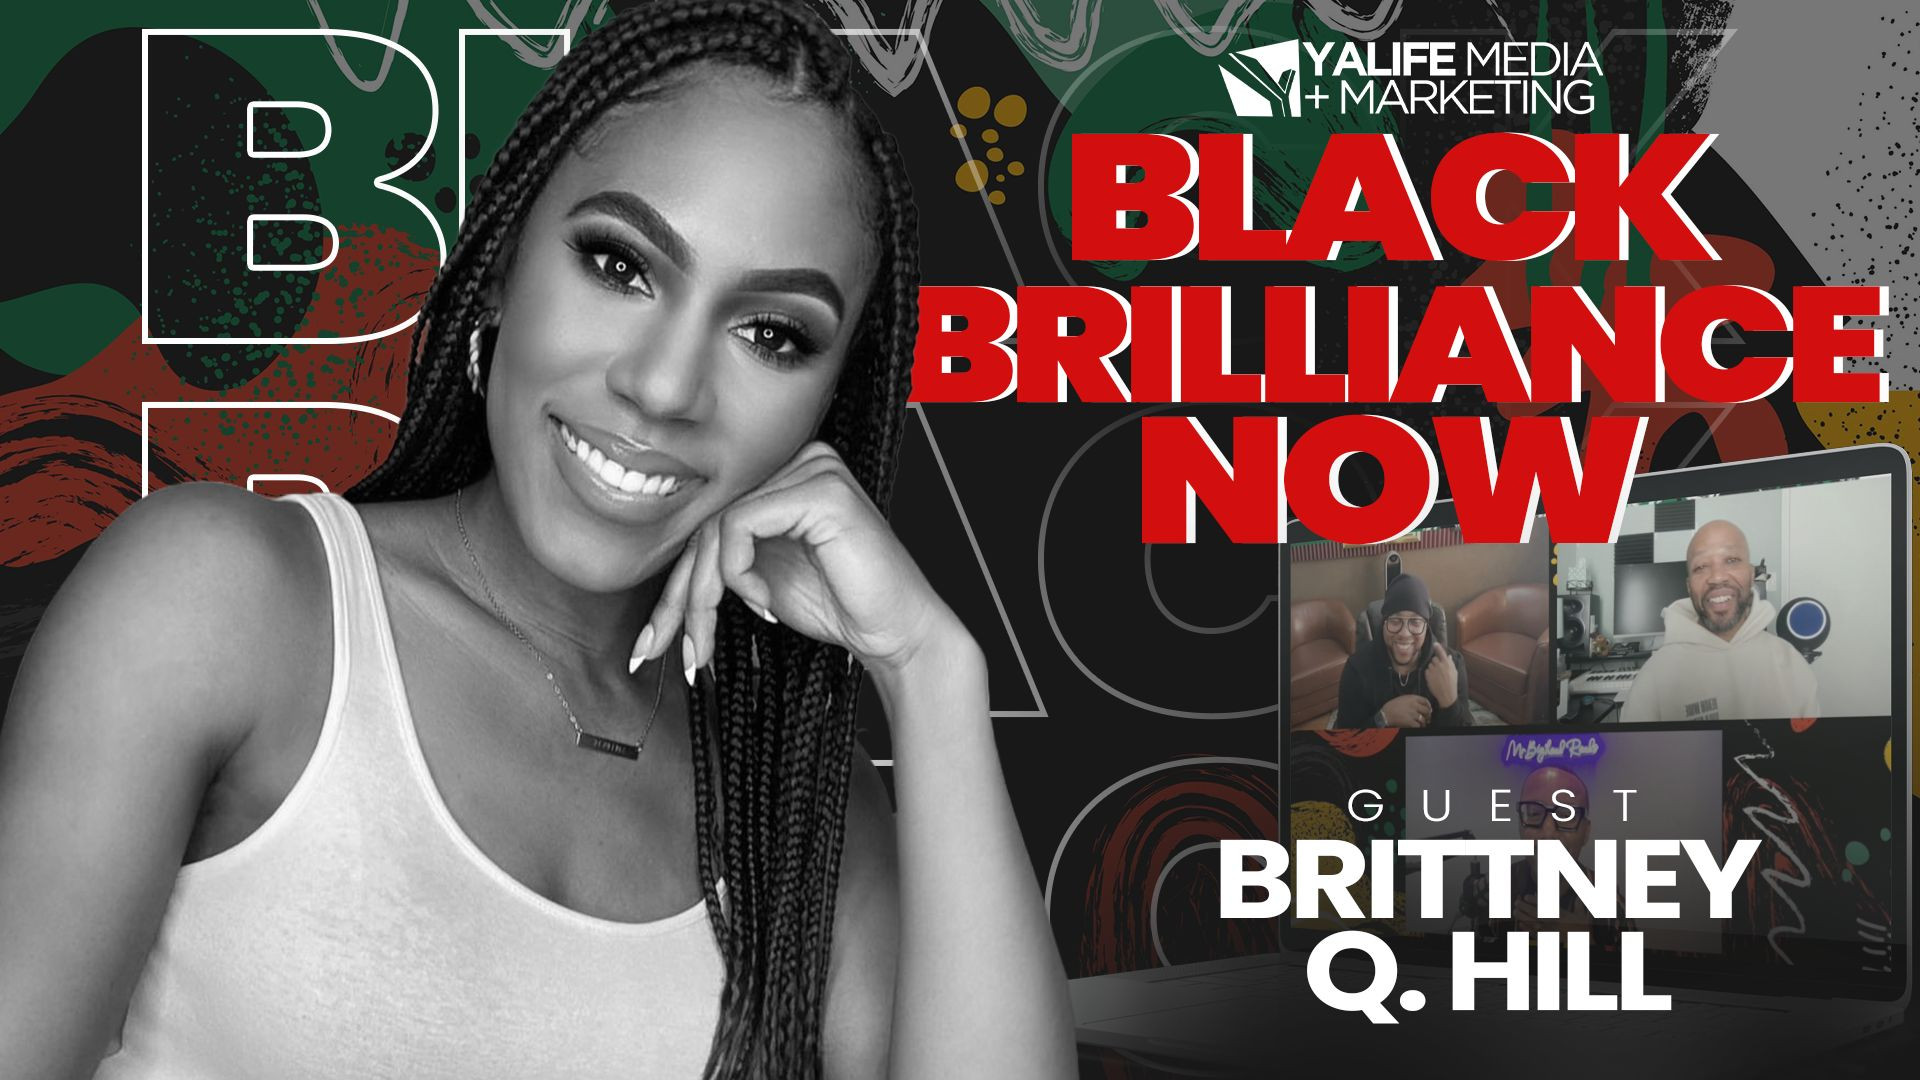 Black Brilliance Now with guest Brittney Q. Hill